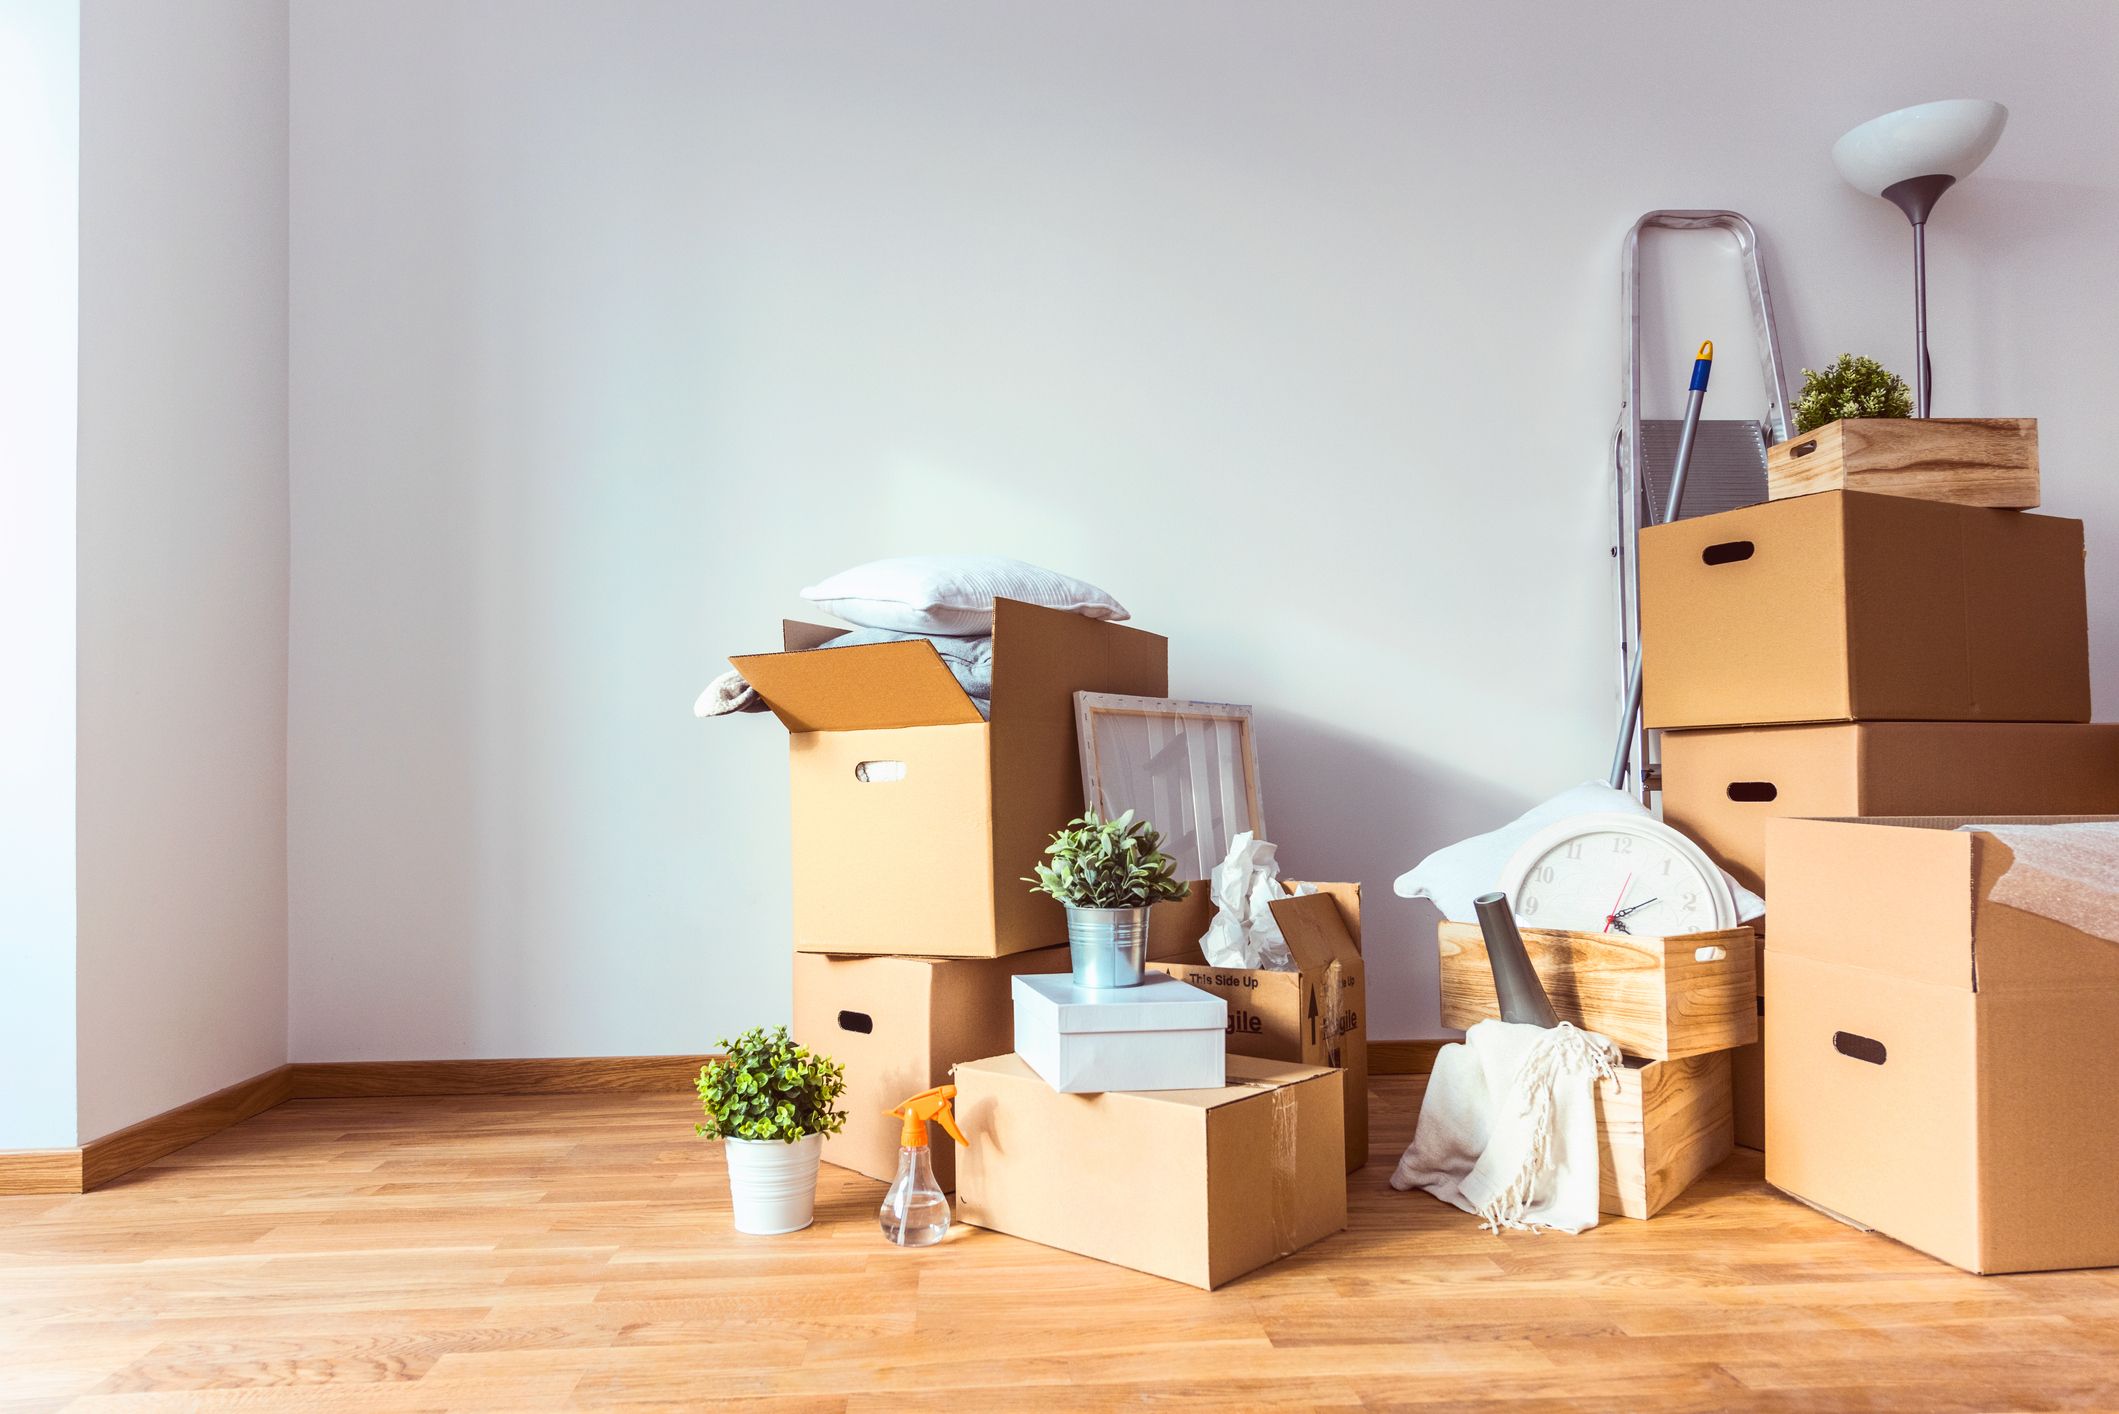 Moving Homes? Here Are The Main Things to Buy